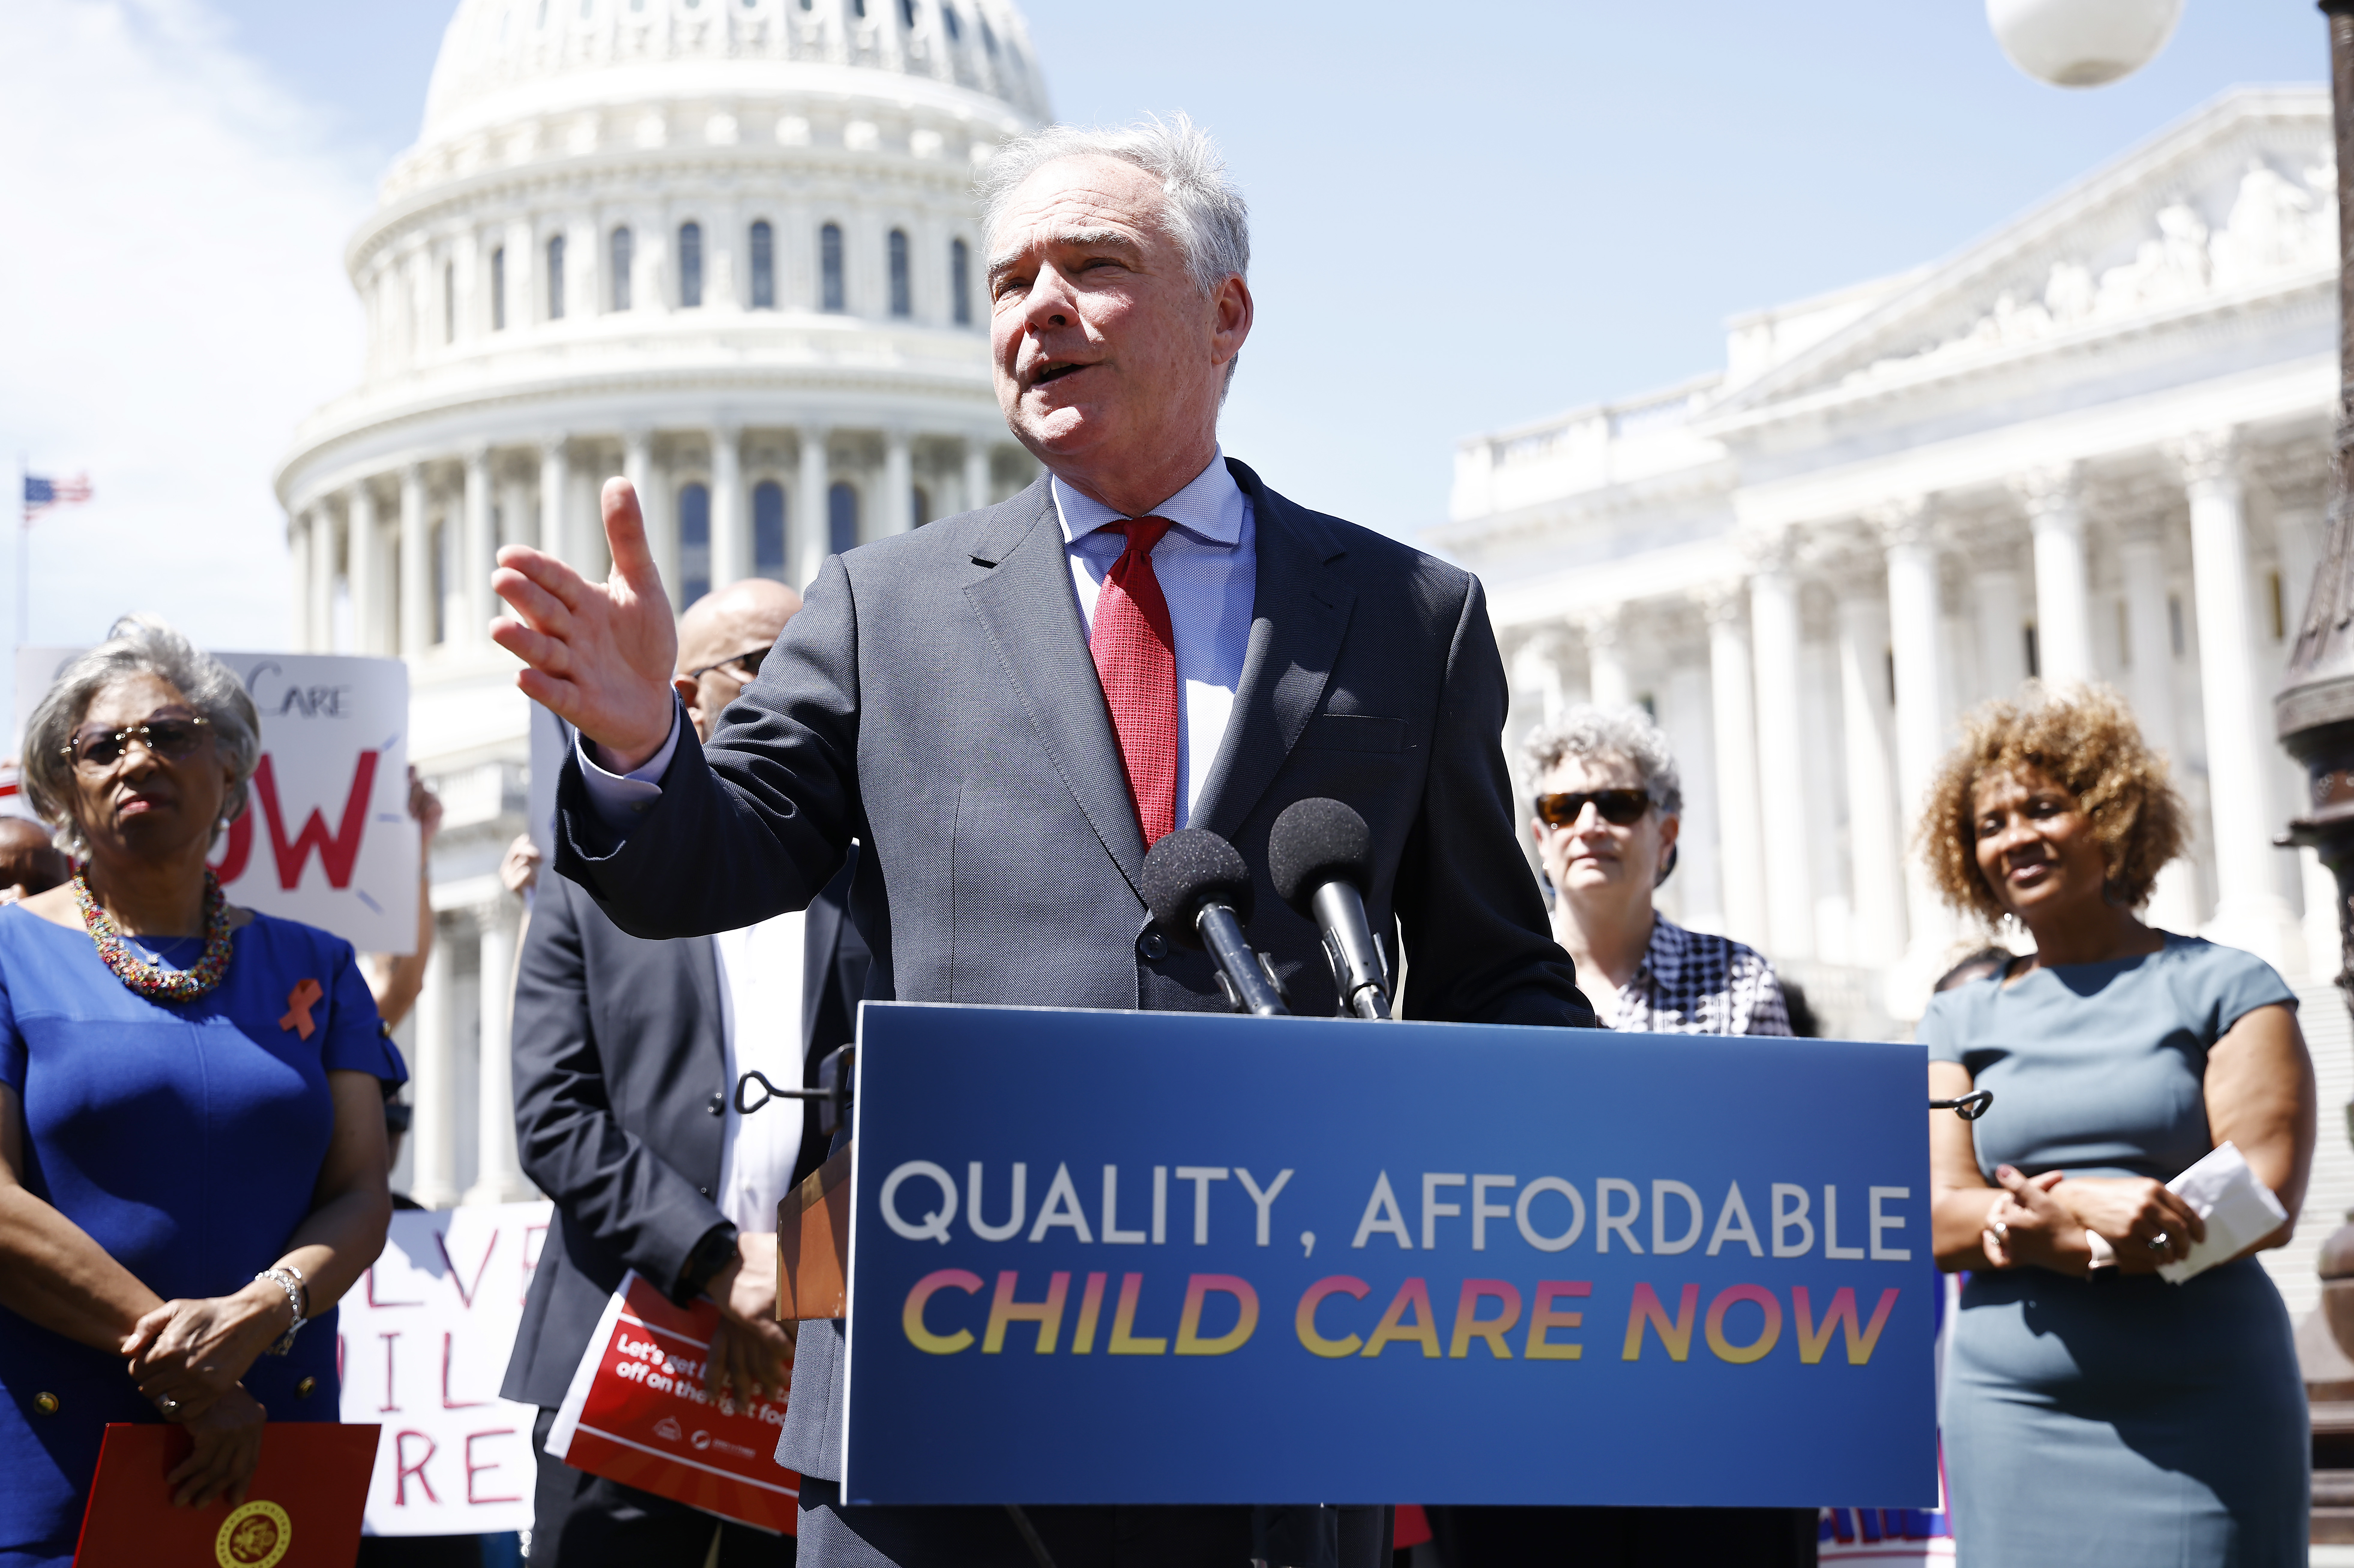 WASHINGTON, DC - JUNE 09: Sen. Tim Kaine (D-VA) joins members of Congress and advocates to push for child care in budget reconciliation outside of the U.S. Capitol Building on June 09, 2022 in Washington, DC. (Photo by Paul Morigi/Getty Images for Care Can't Wait)